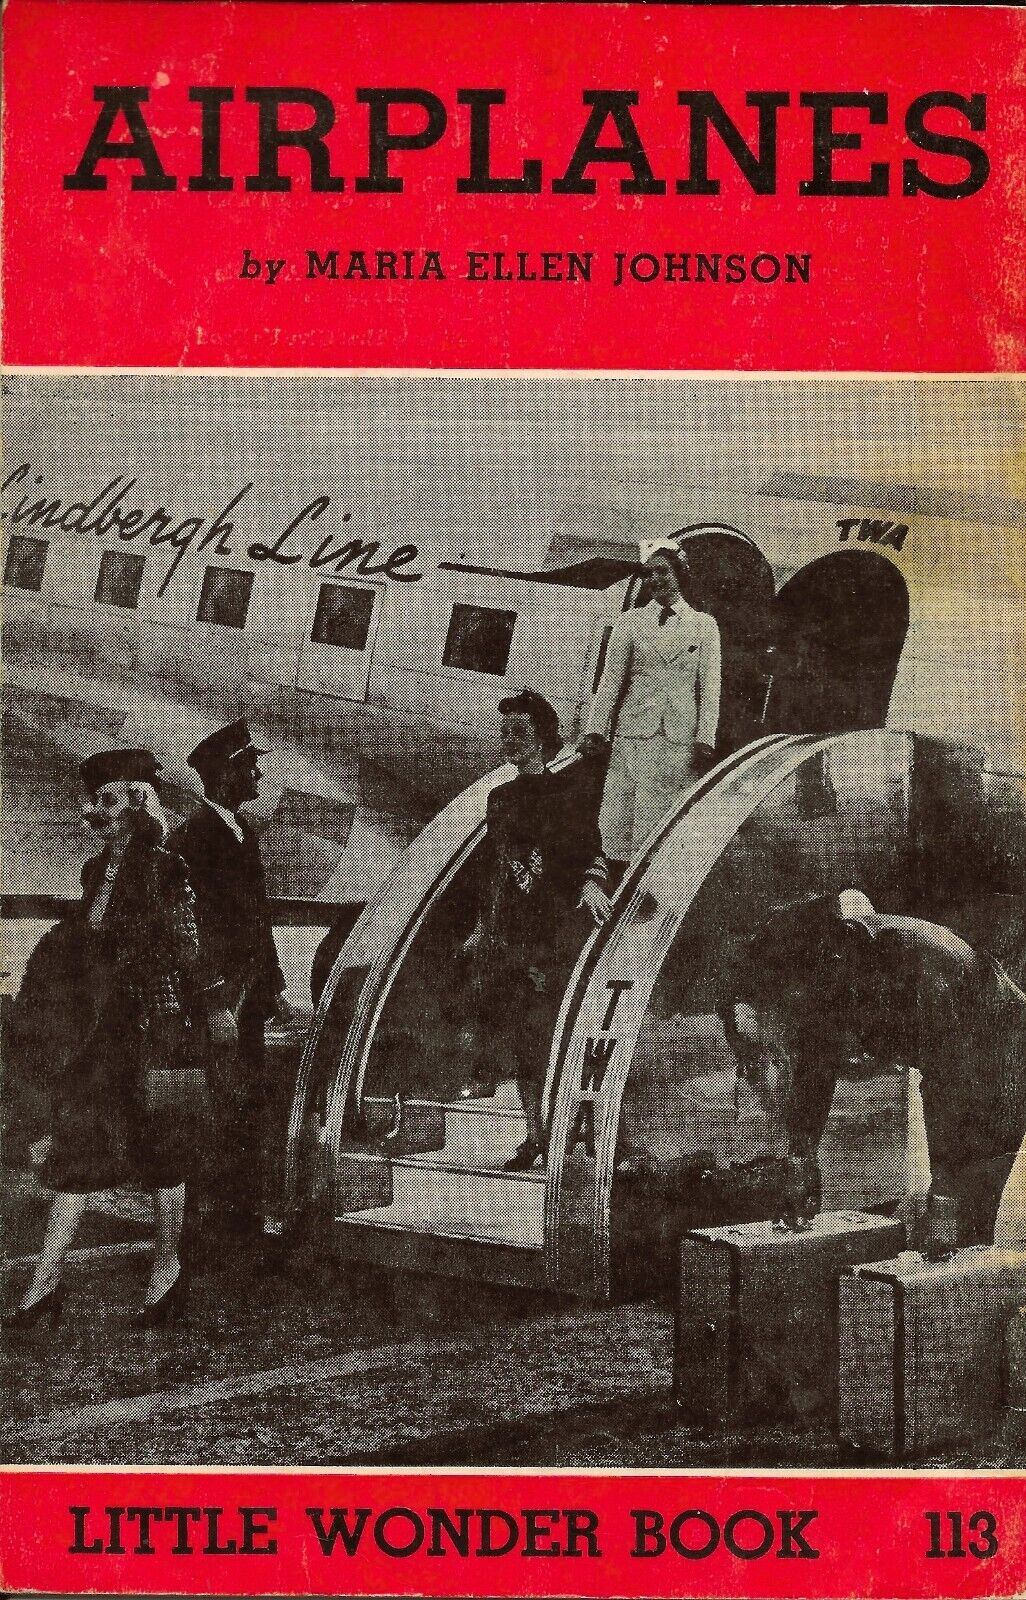 Airplanes 34 Page 1947 Picture Book, Great Look into Airlines past operation